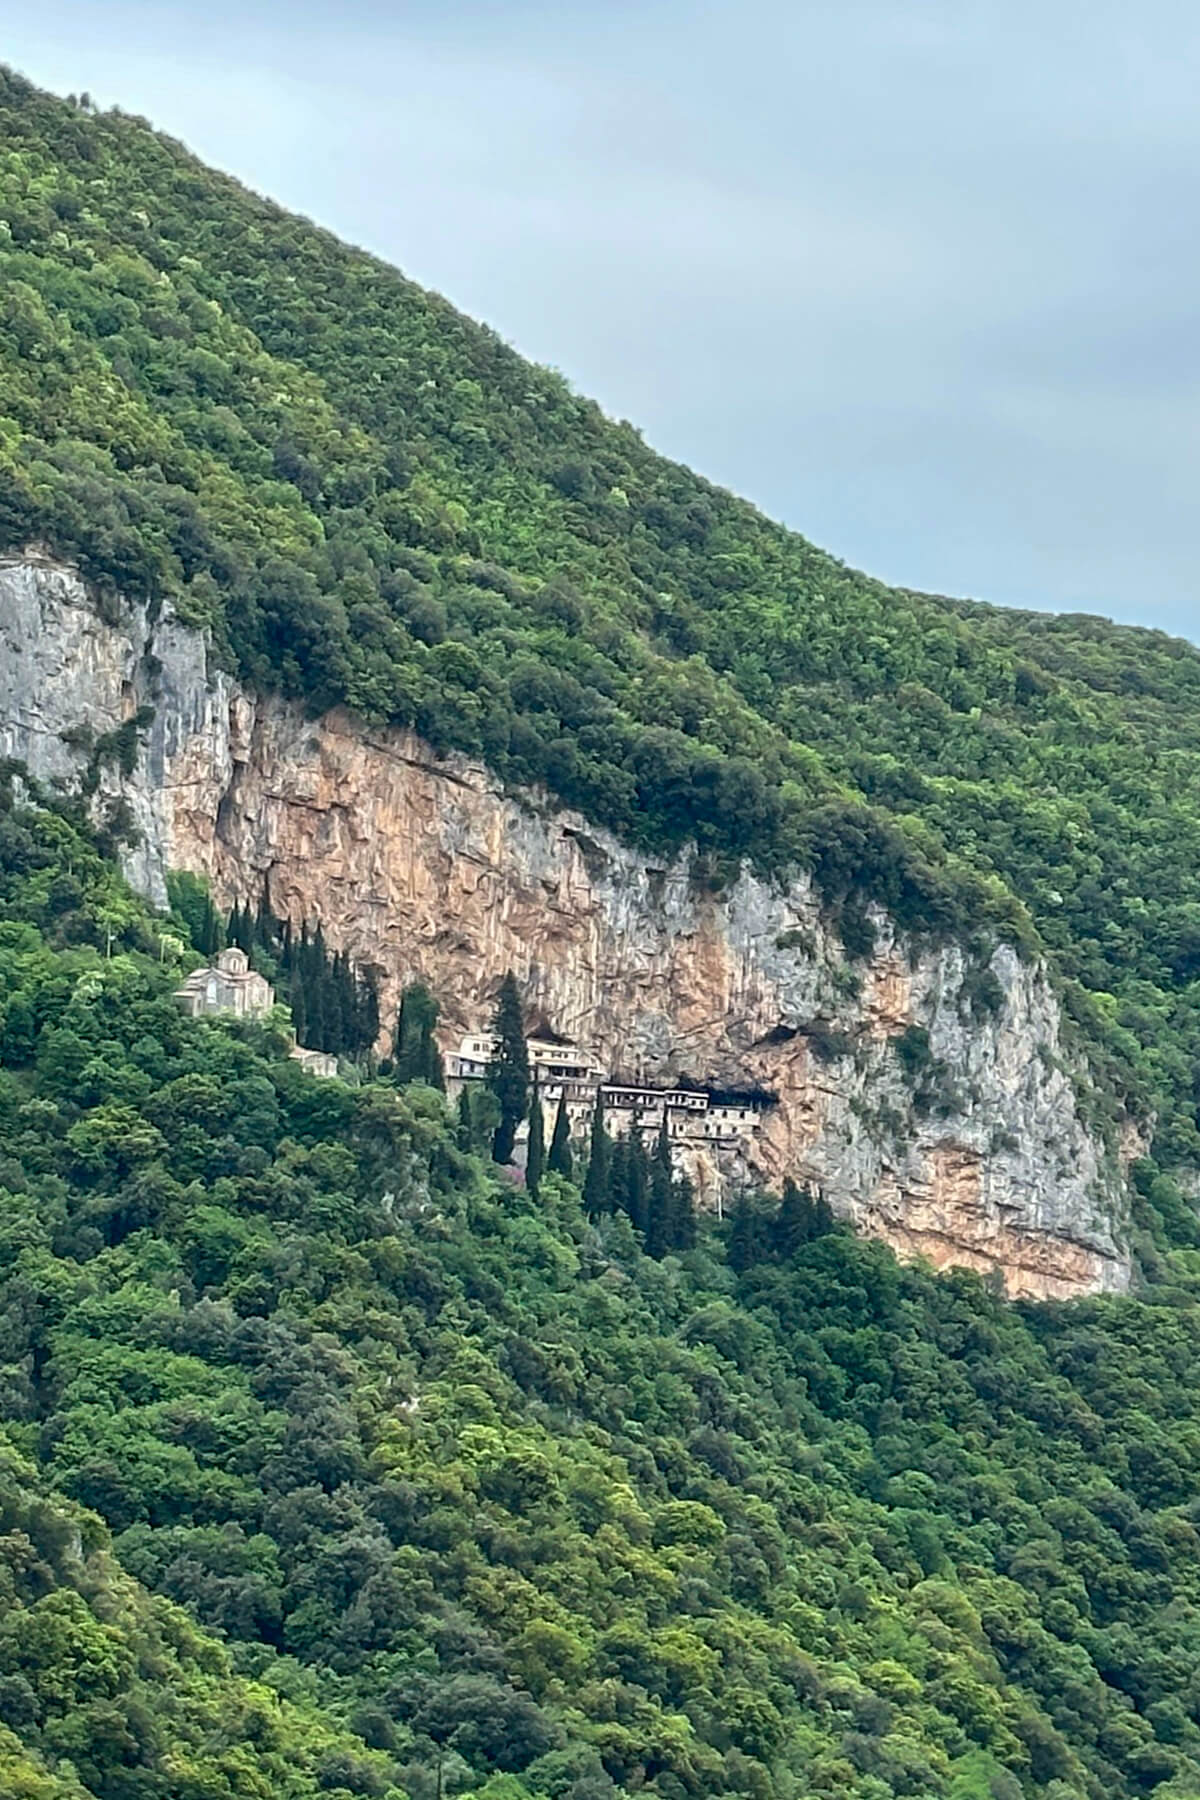 A view of the monastery from afar